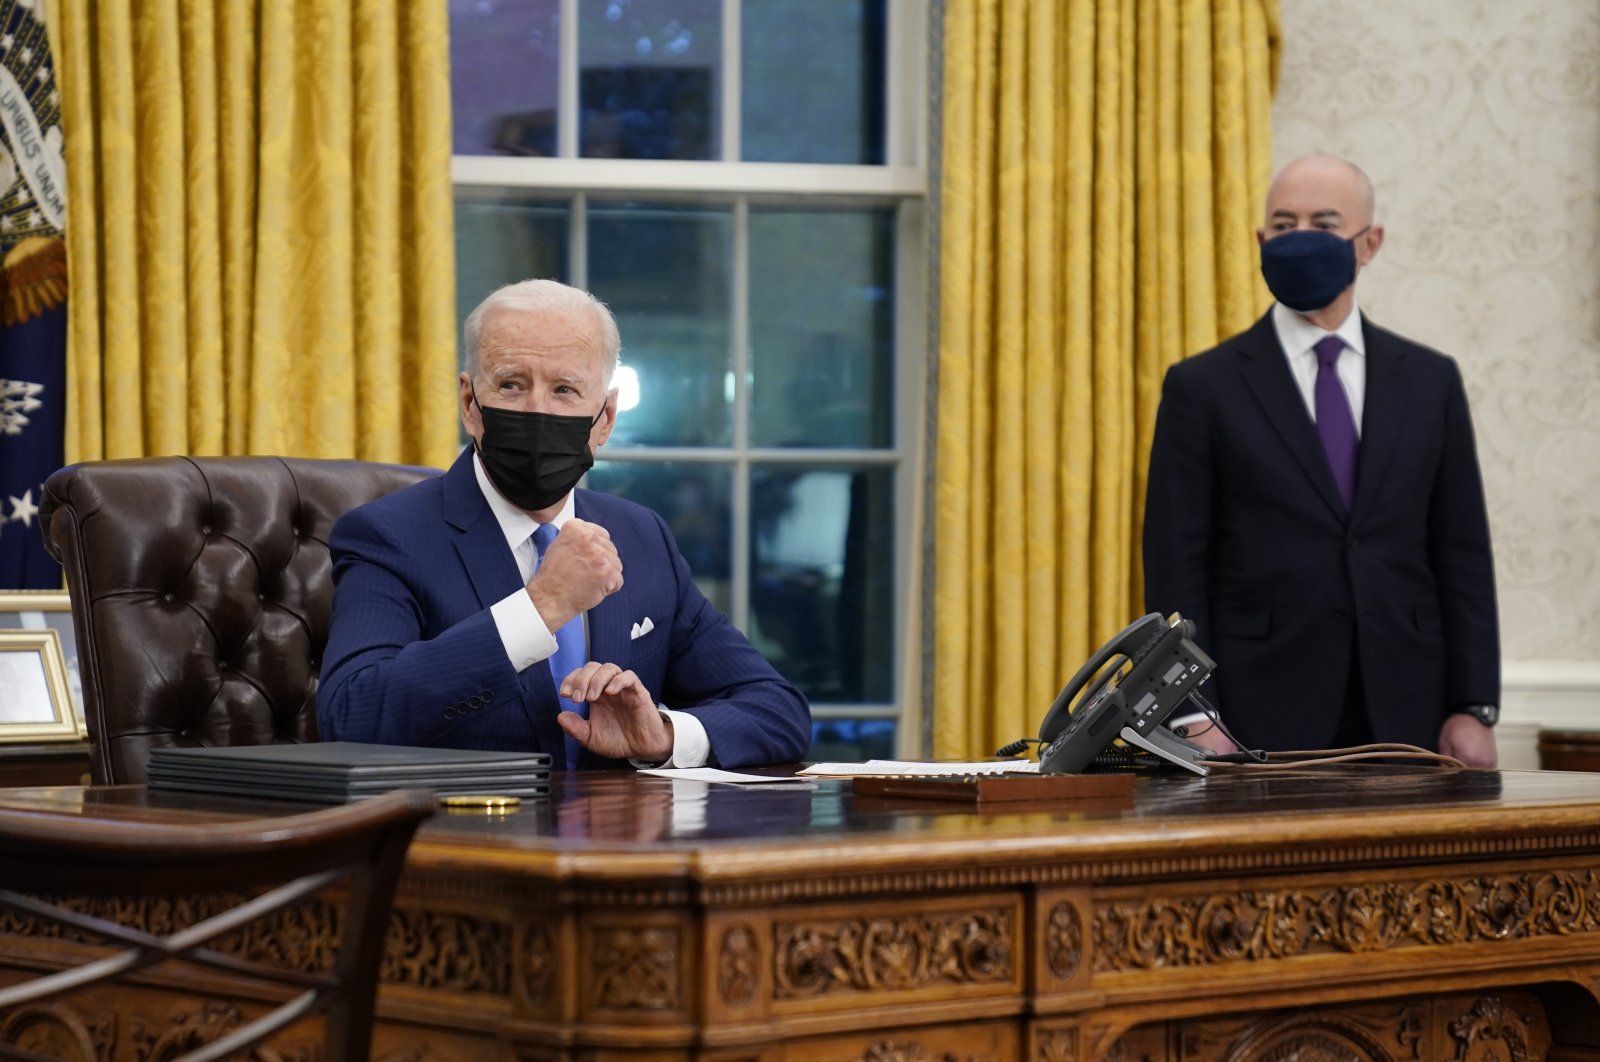 President Joe Biden gestures as he delivers remarks on immigration as the Secretary of Homeland Security Alejandro Mayorkas listens on the right, Oval Office, White House, Washington, Feb. 2, 2021. (AP Photo)